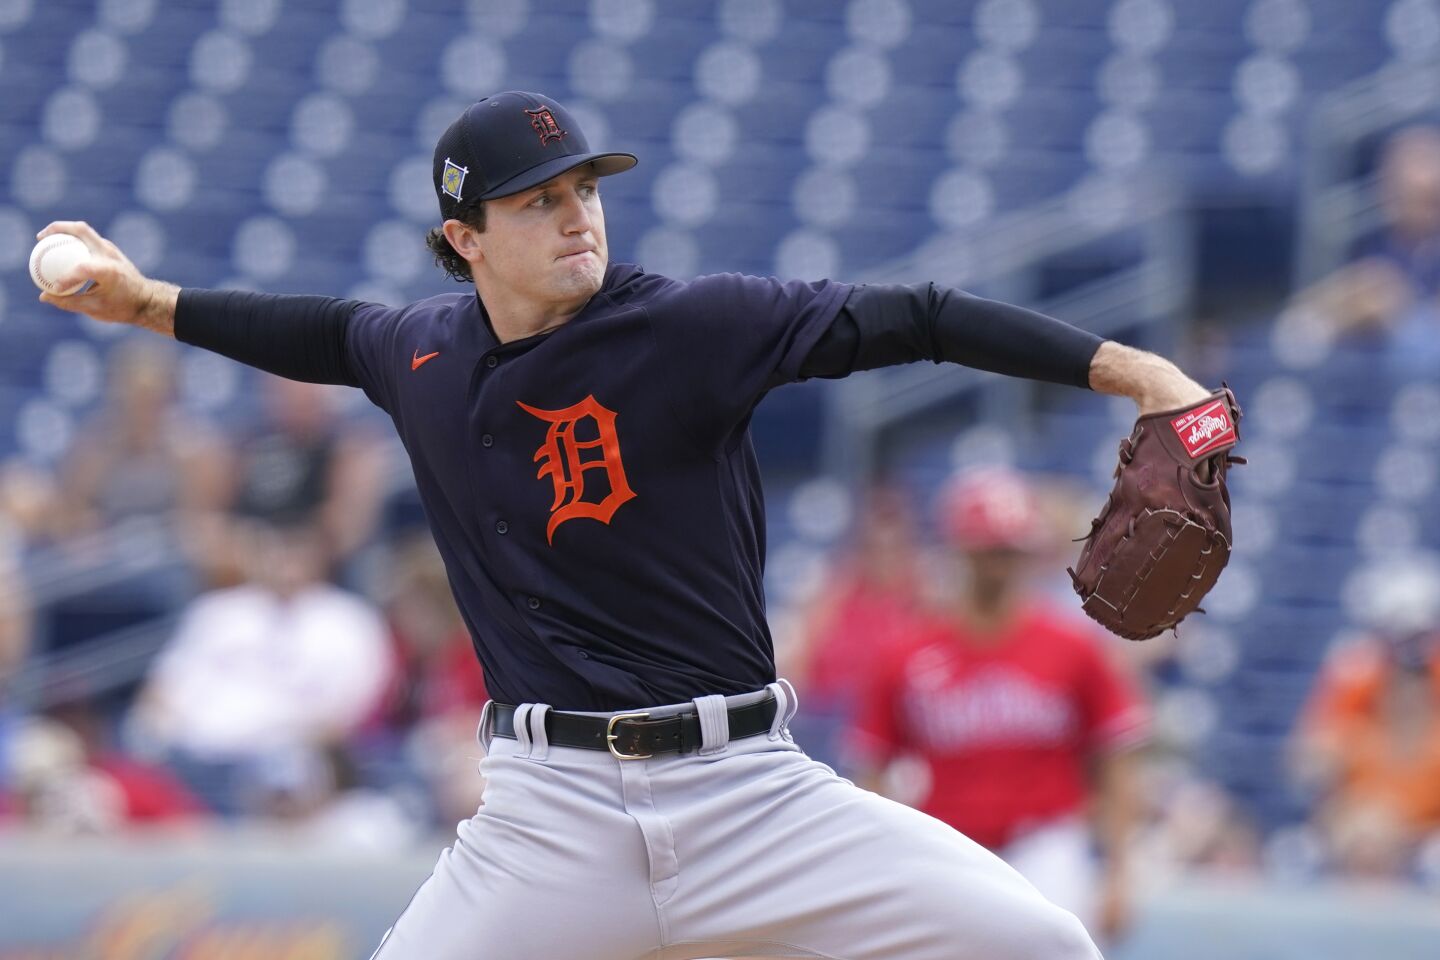 26 | Detroit Tigers (77-85, 3rd in AL Central)With Casey Mize and Tarik Skubal in the rotation and Spencer Torkelson on the come, the continuation of A.J. Hinch’s sign-stealing penance in Detroit could soon see light at the end of the tunnel.